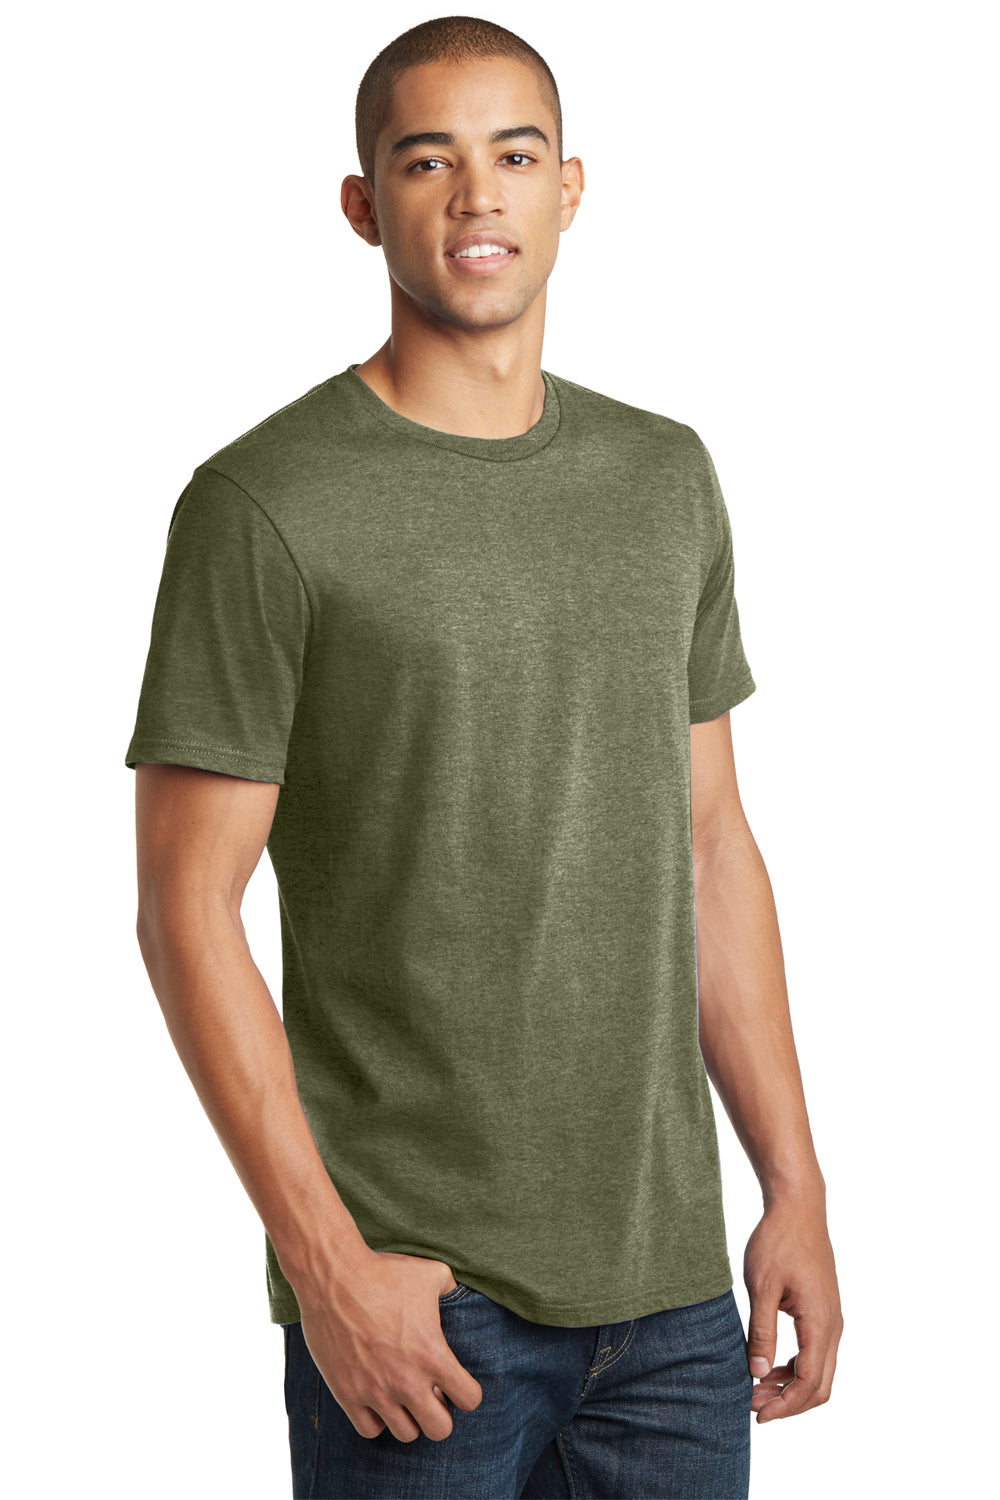 District DT5000 Mens The Concert Short Sleeve Crewneck T-Shirt Military Green Frost 3Q